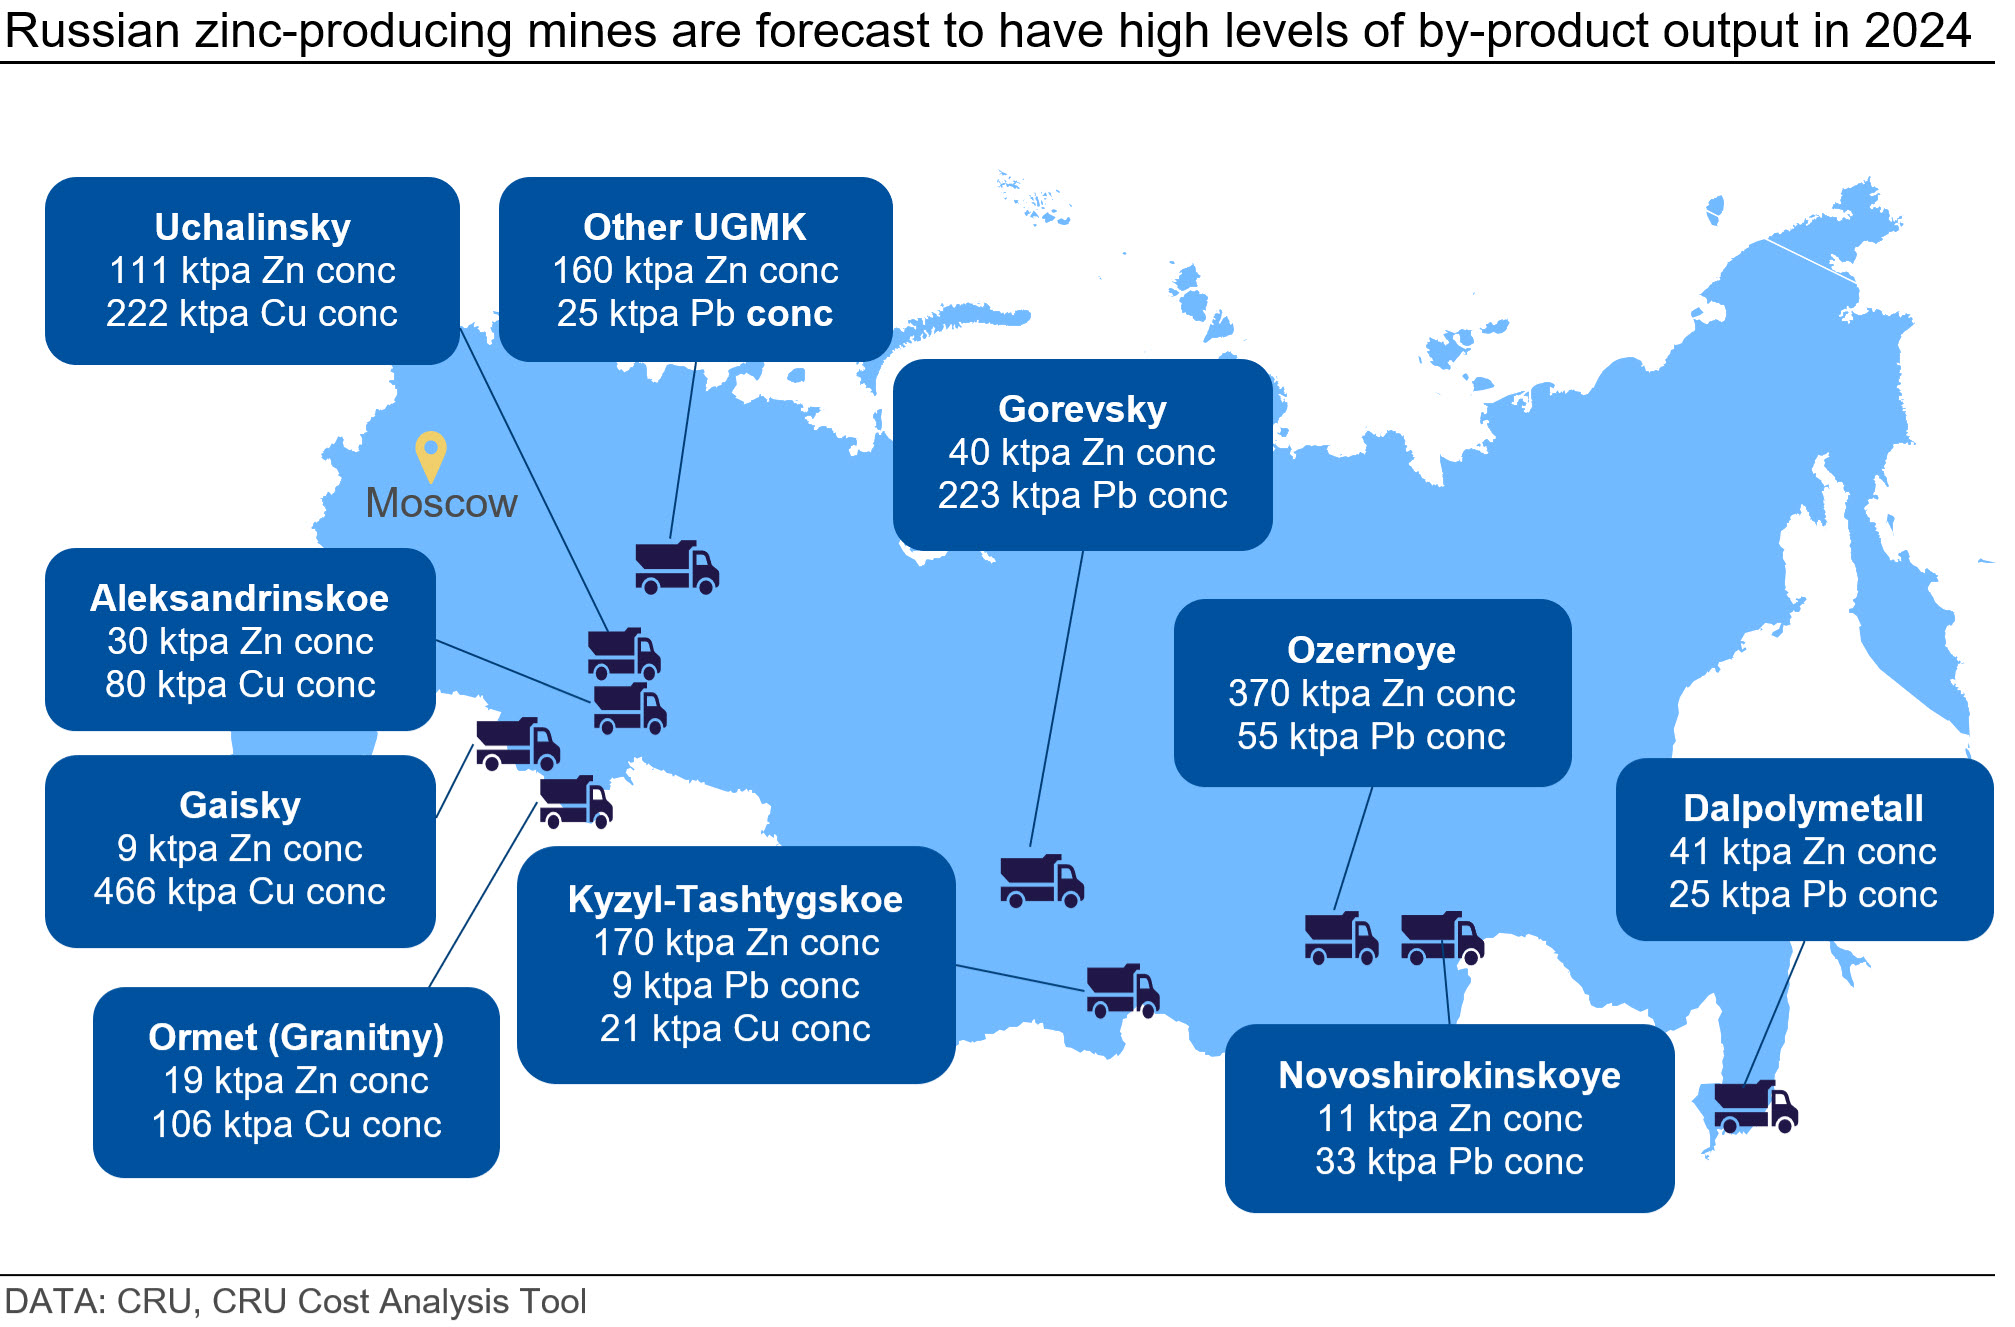 Graph showing that Russian zinc-producing mines are forecast to have high levels of by-product output in 2024